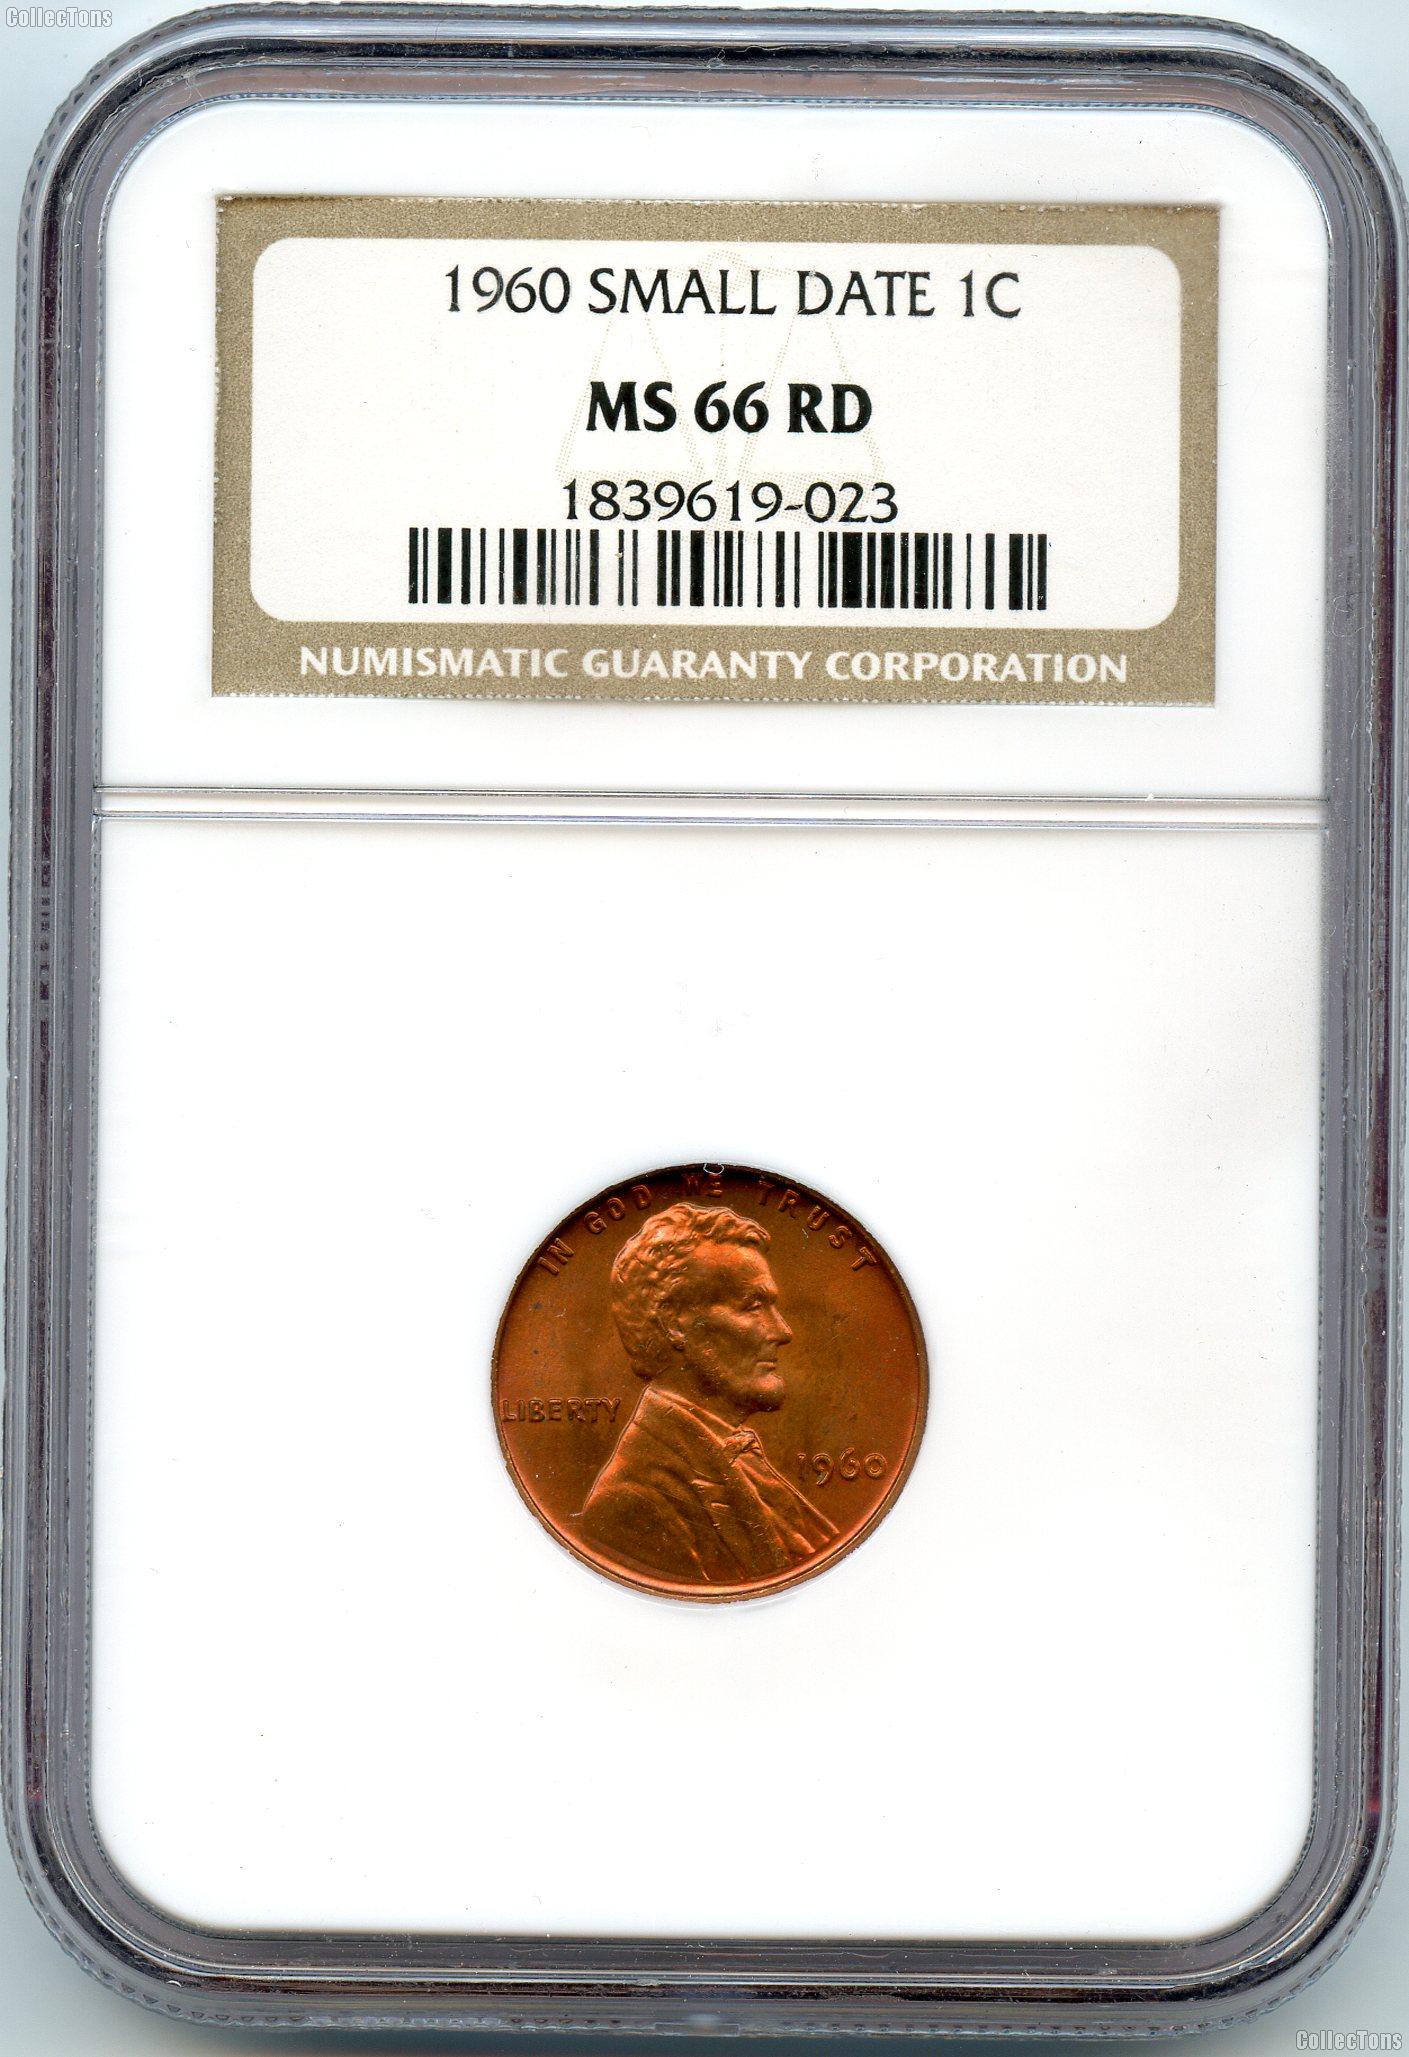 1960 Small Date Lincoln Memorial Cent in NGC MS 66 Red